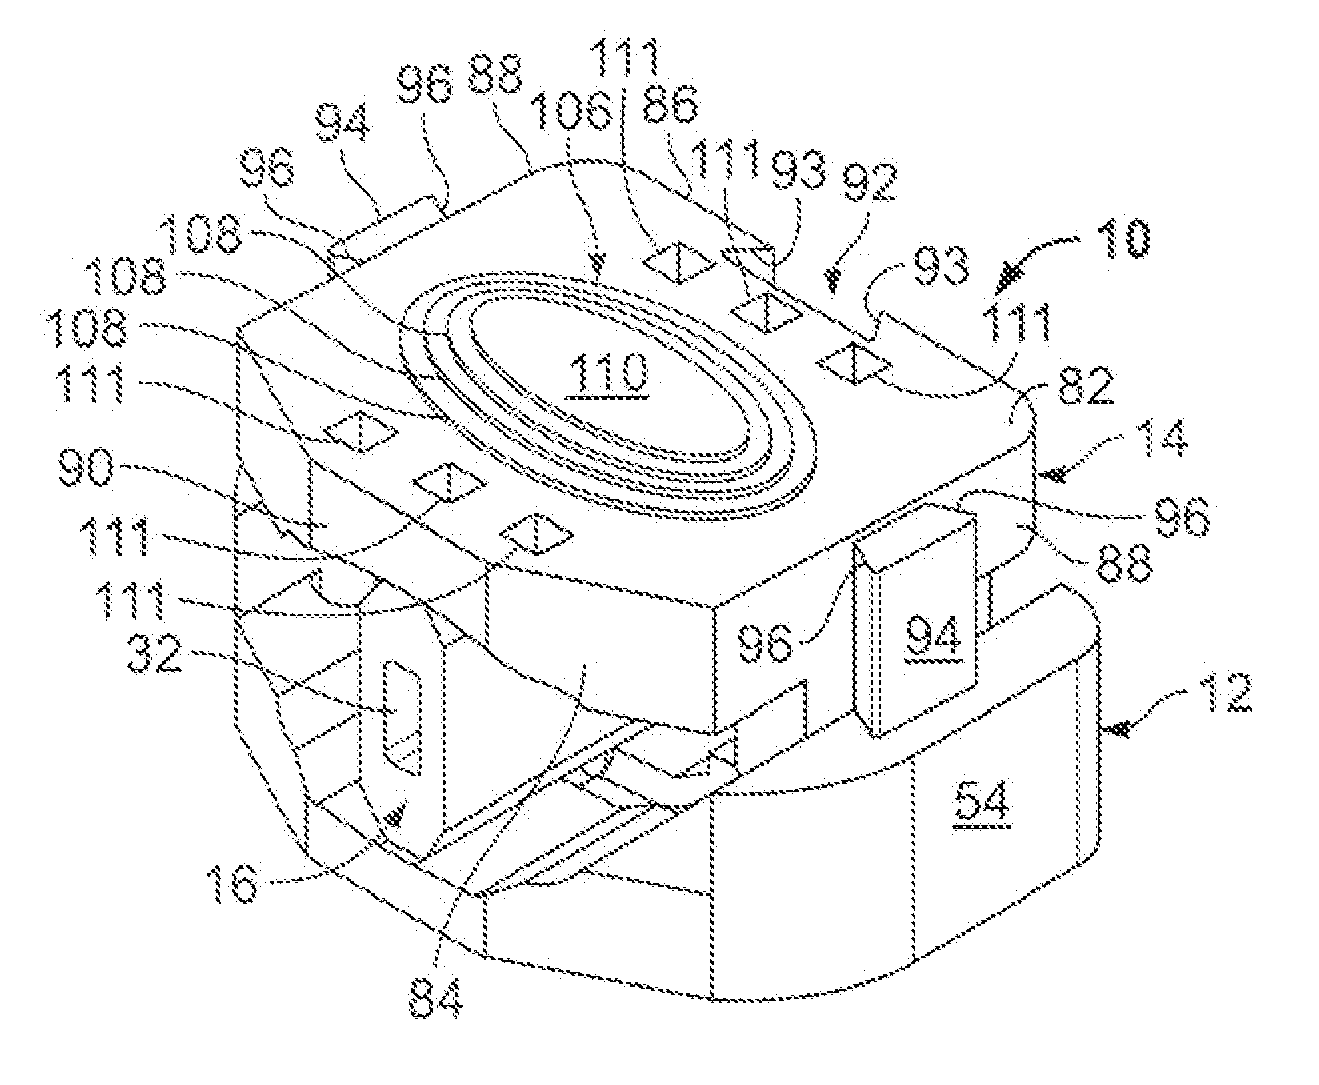 Expandable interbody fusion cage with rotational insert